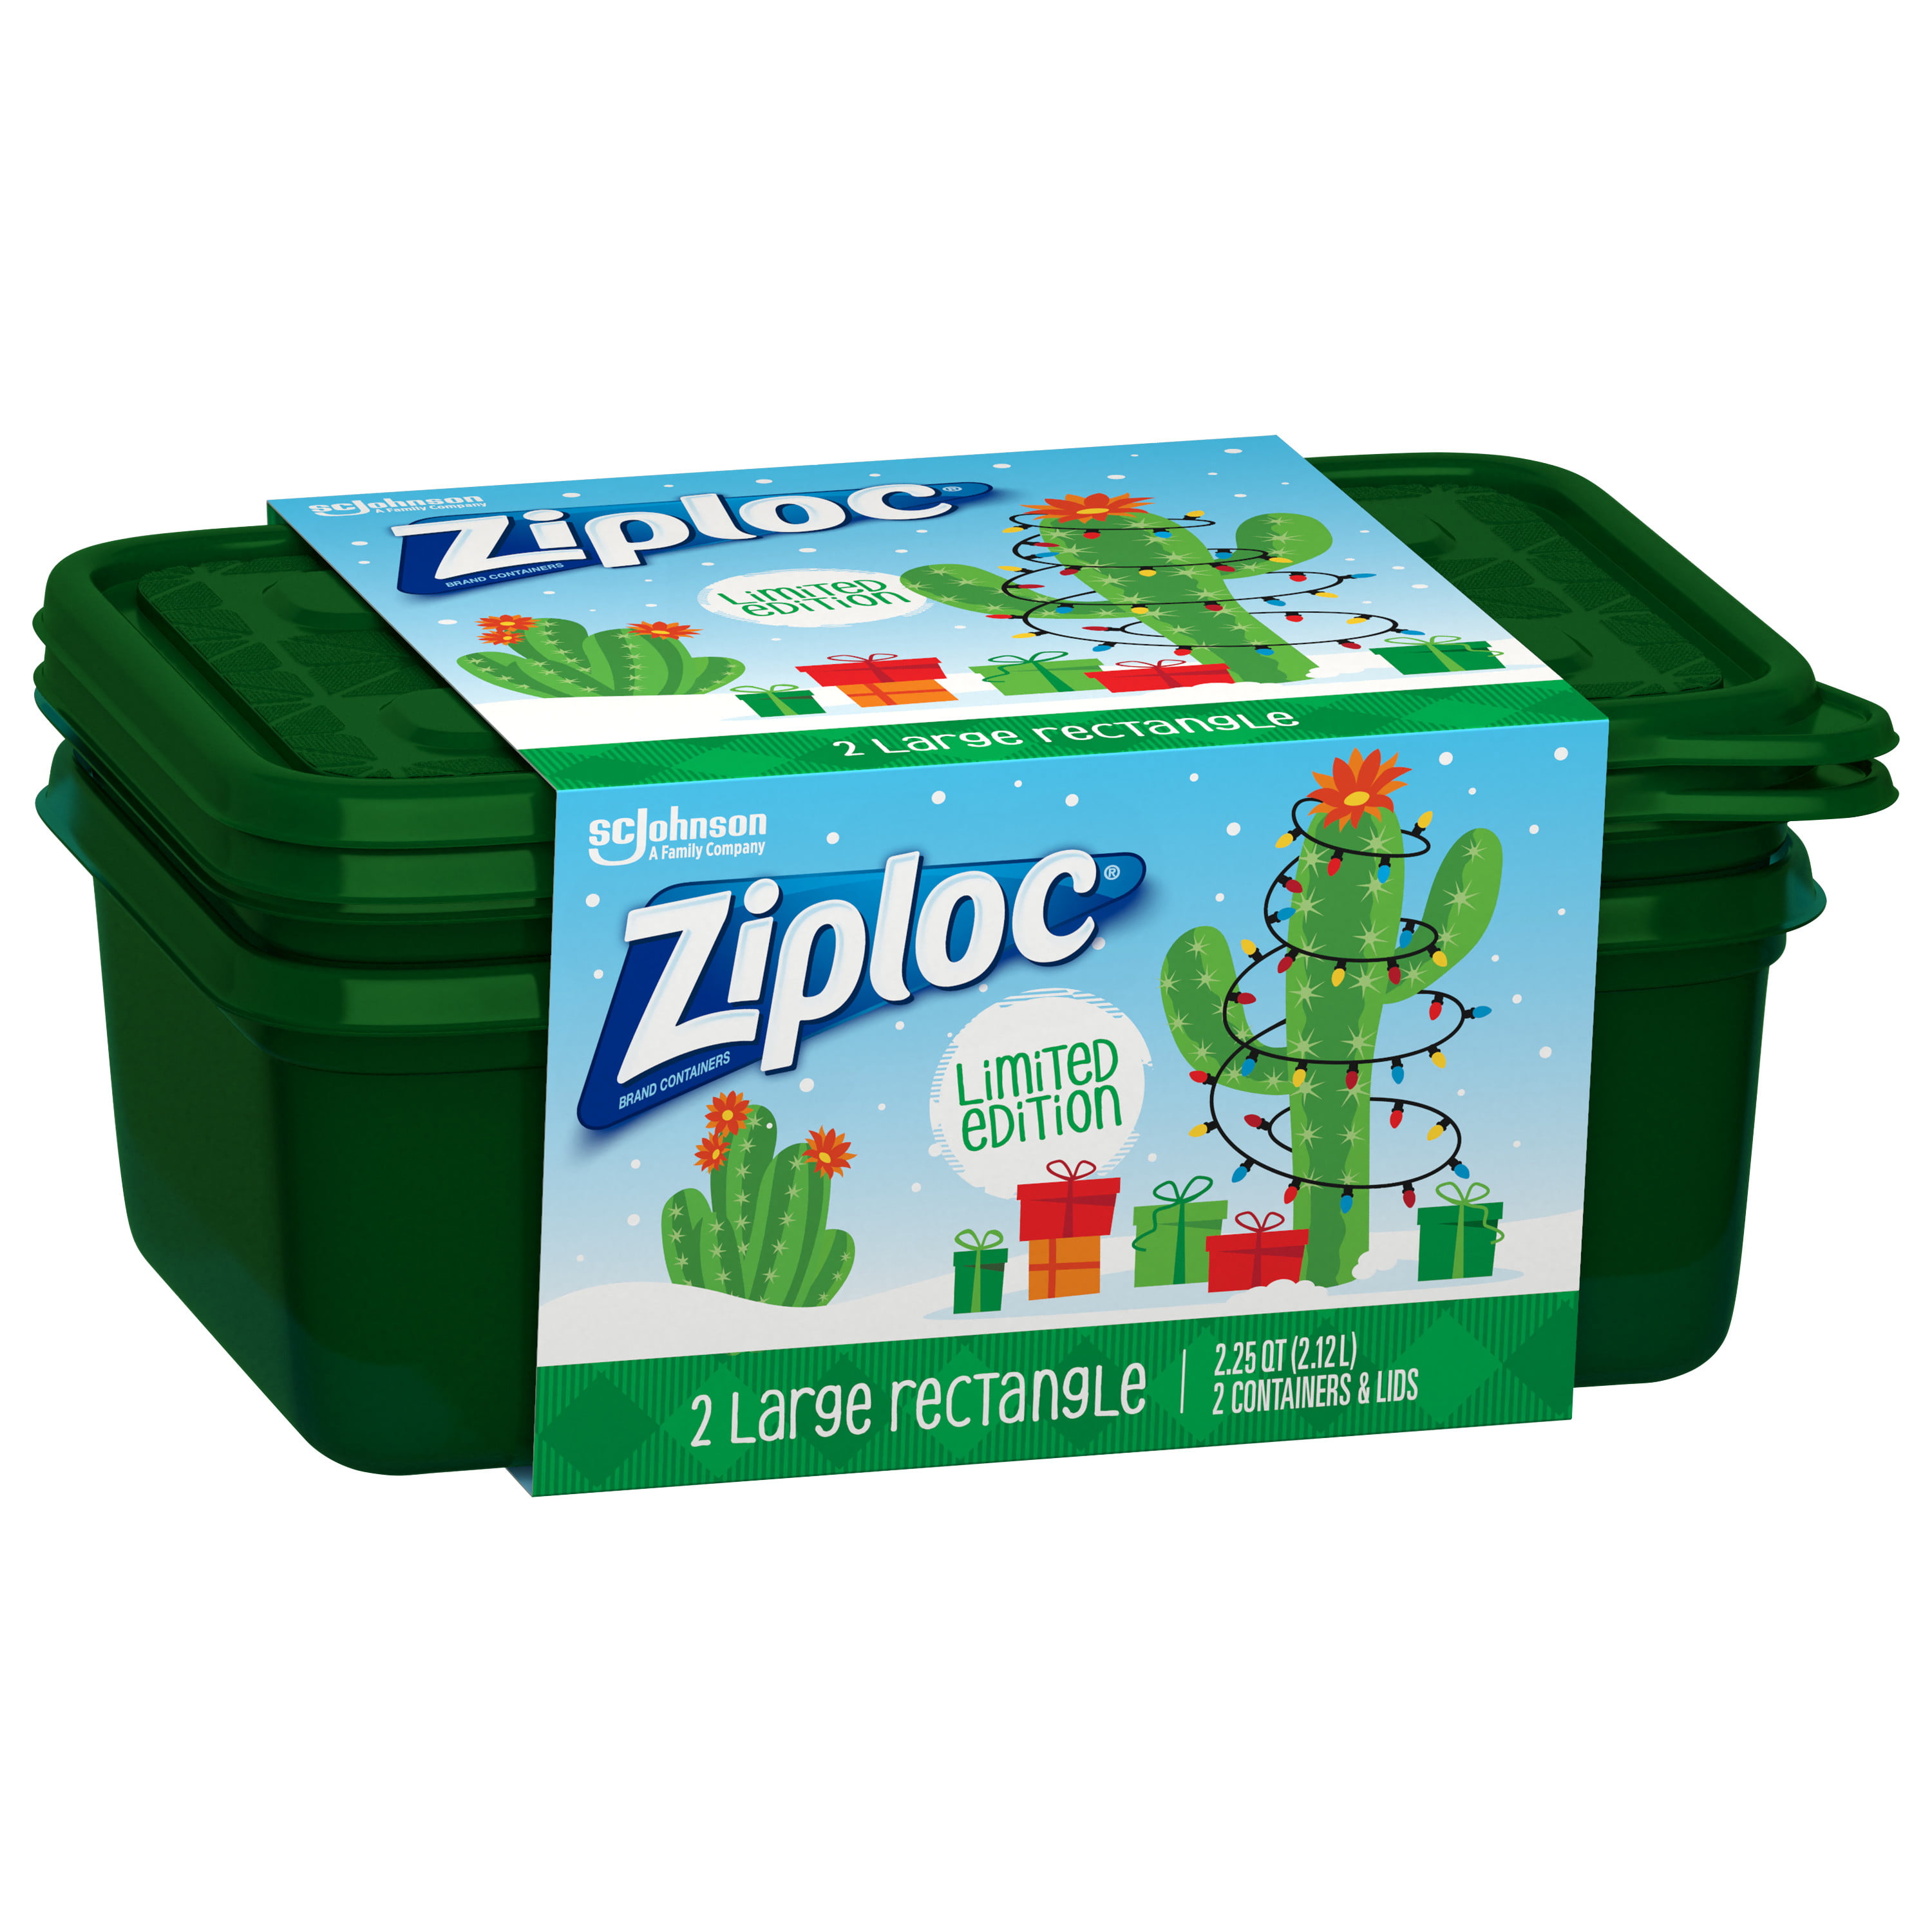 Ziploc Large Rectangle 9 Cup Containers with Lids, 2 Count